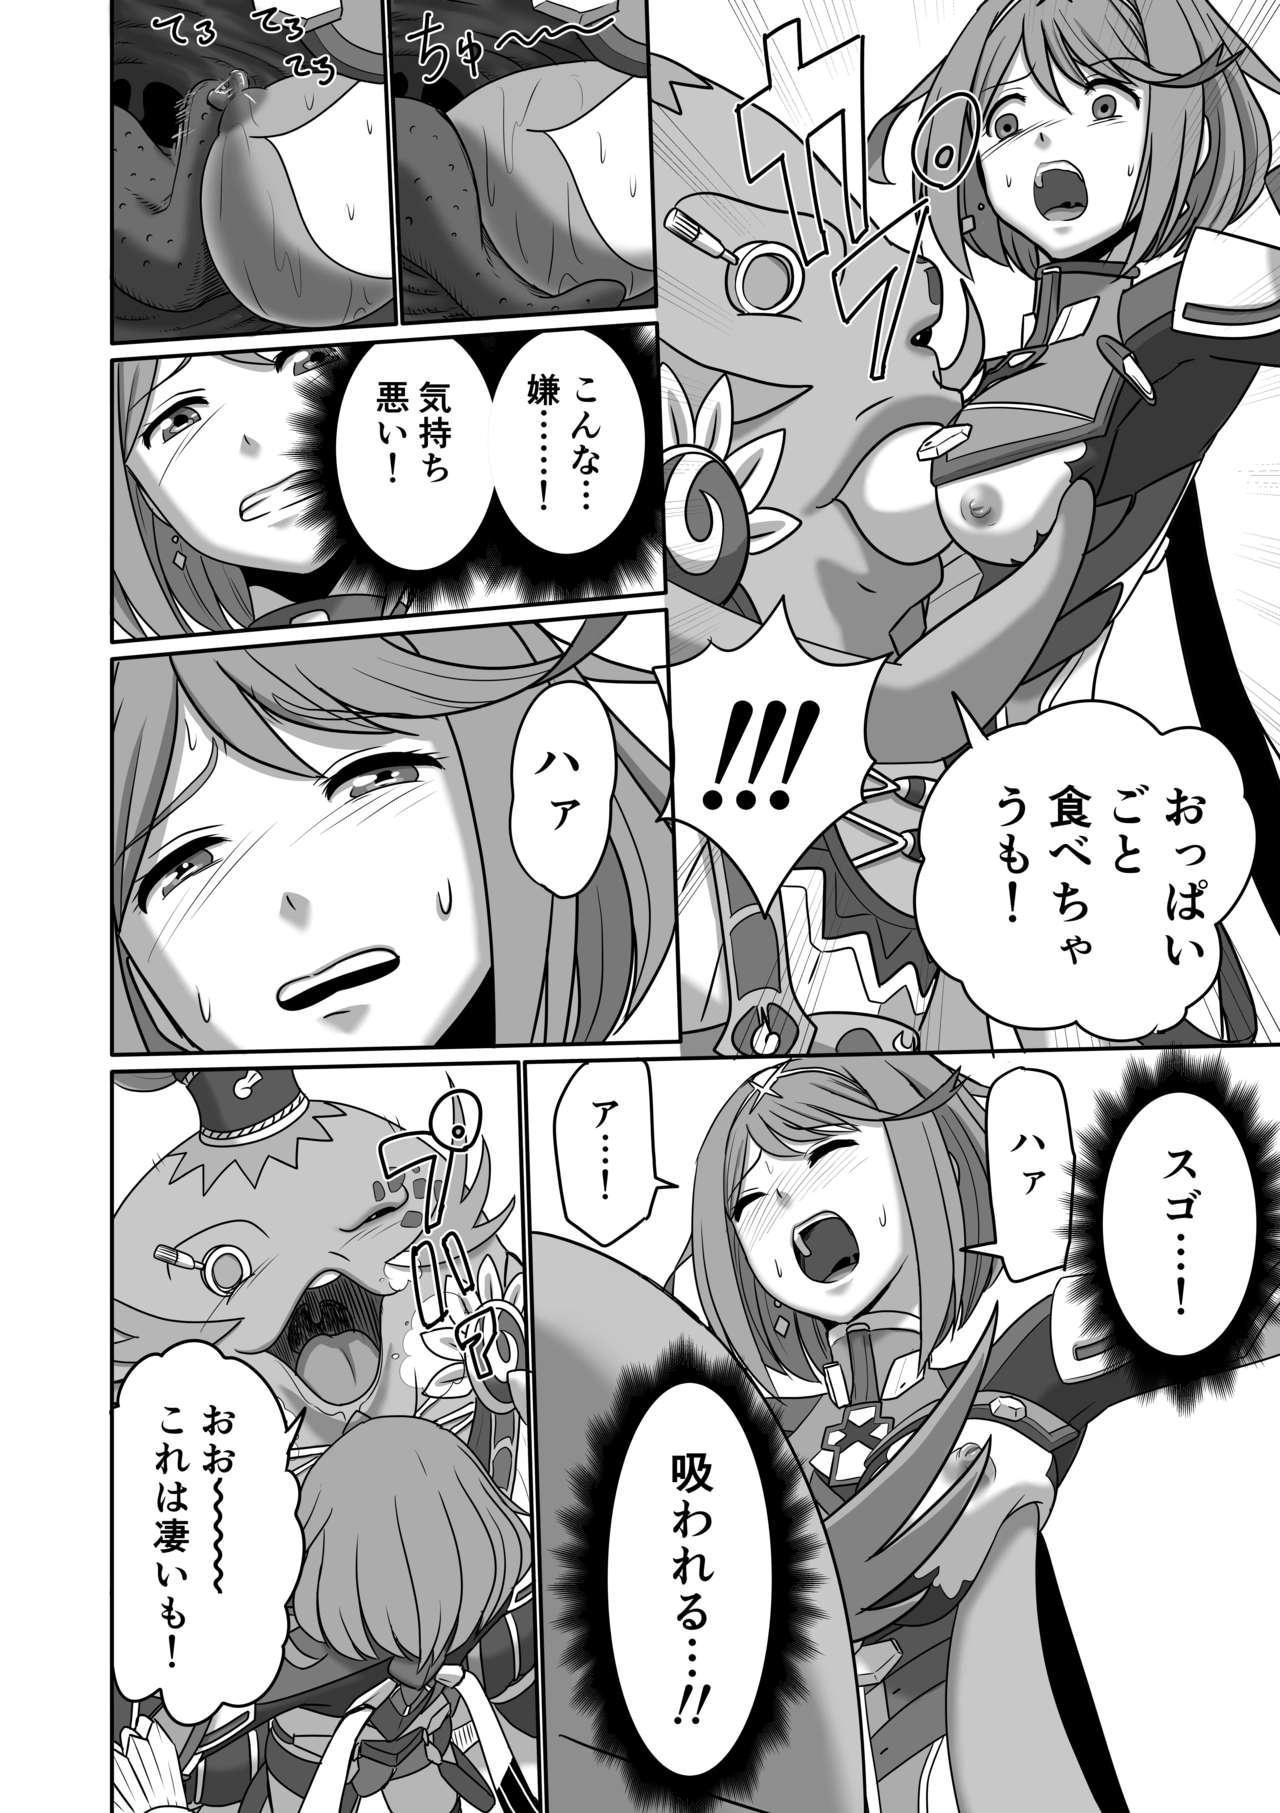 Lingerie BLADE SET DX - Xenoblade chronicles 2 Milf Cougar - Page 10